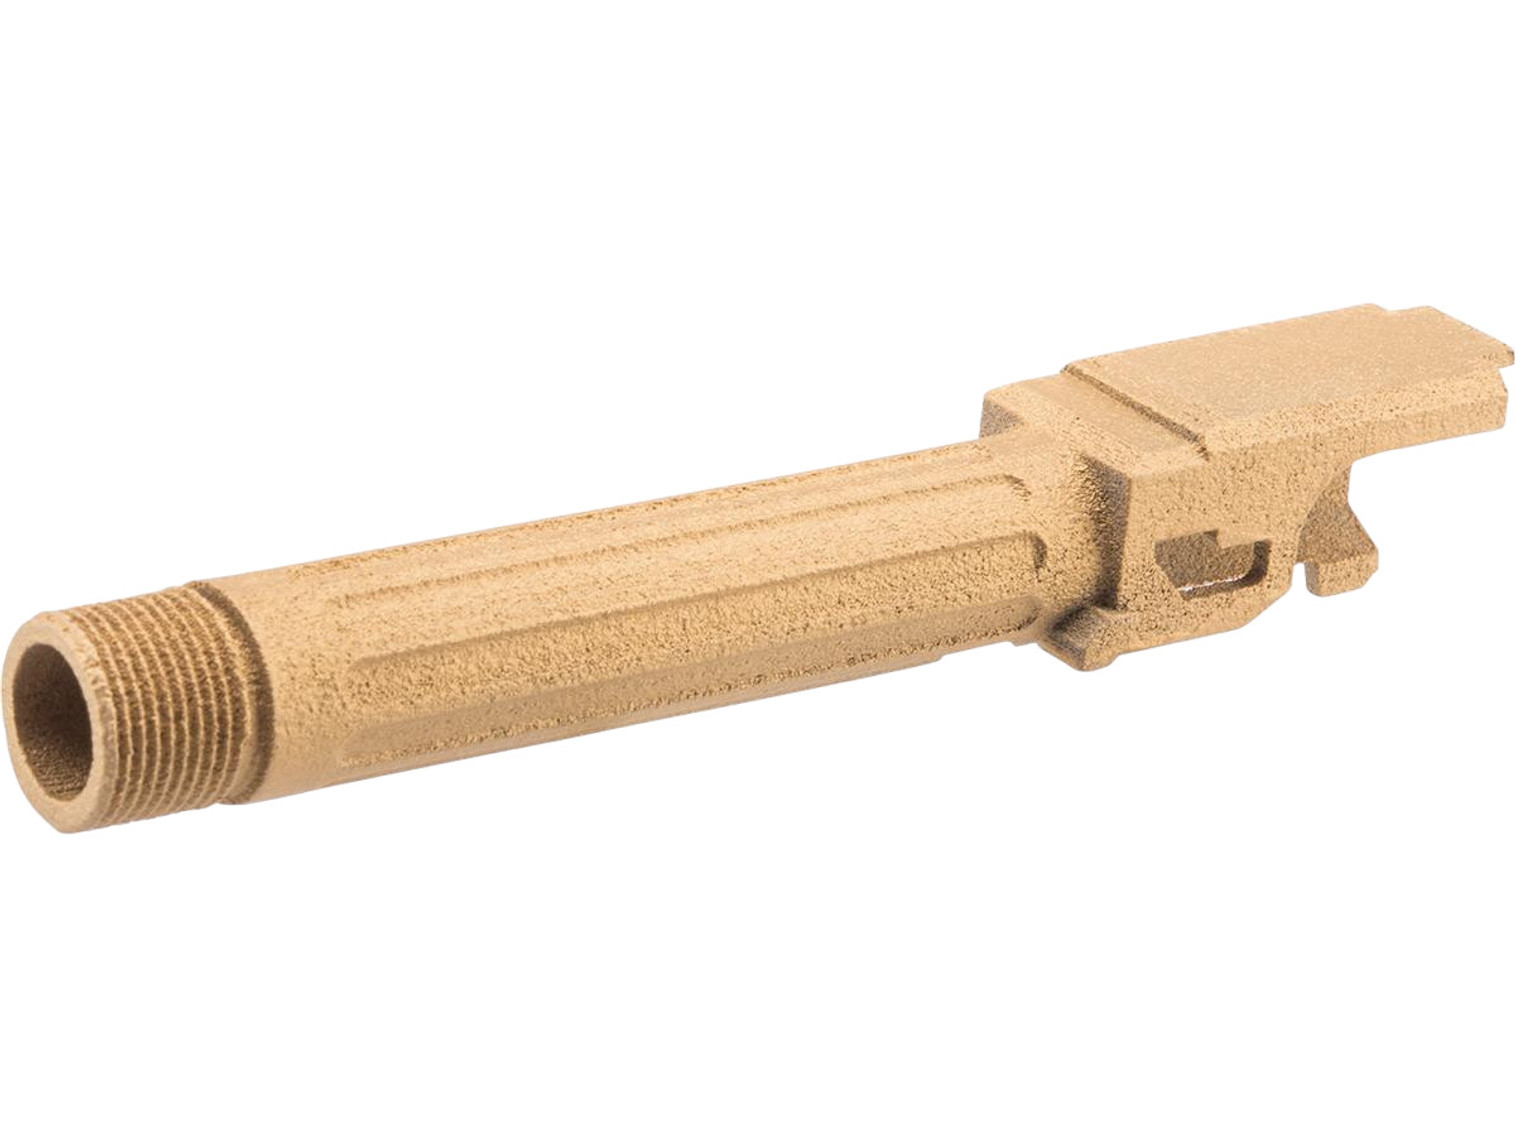 Tapp Airsoft 3D Printed Threaded Barrel w/ Custom Cerakote for TM Compact Poly Frame Gas Blowback Airsoft Pistols (Color: Gold)